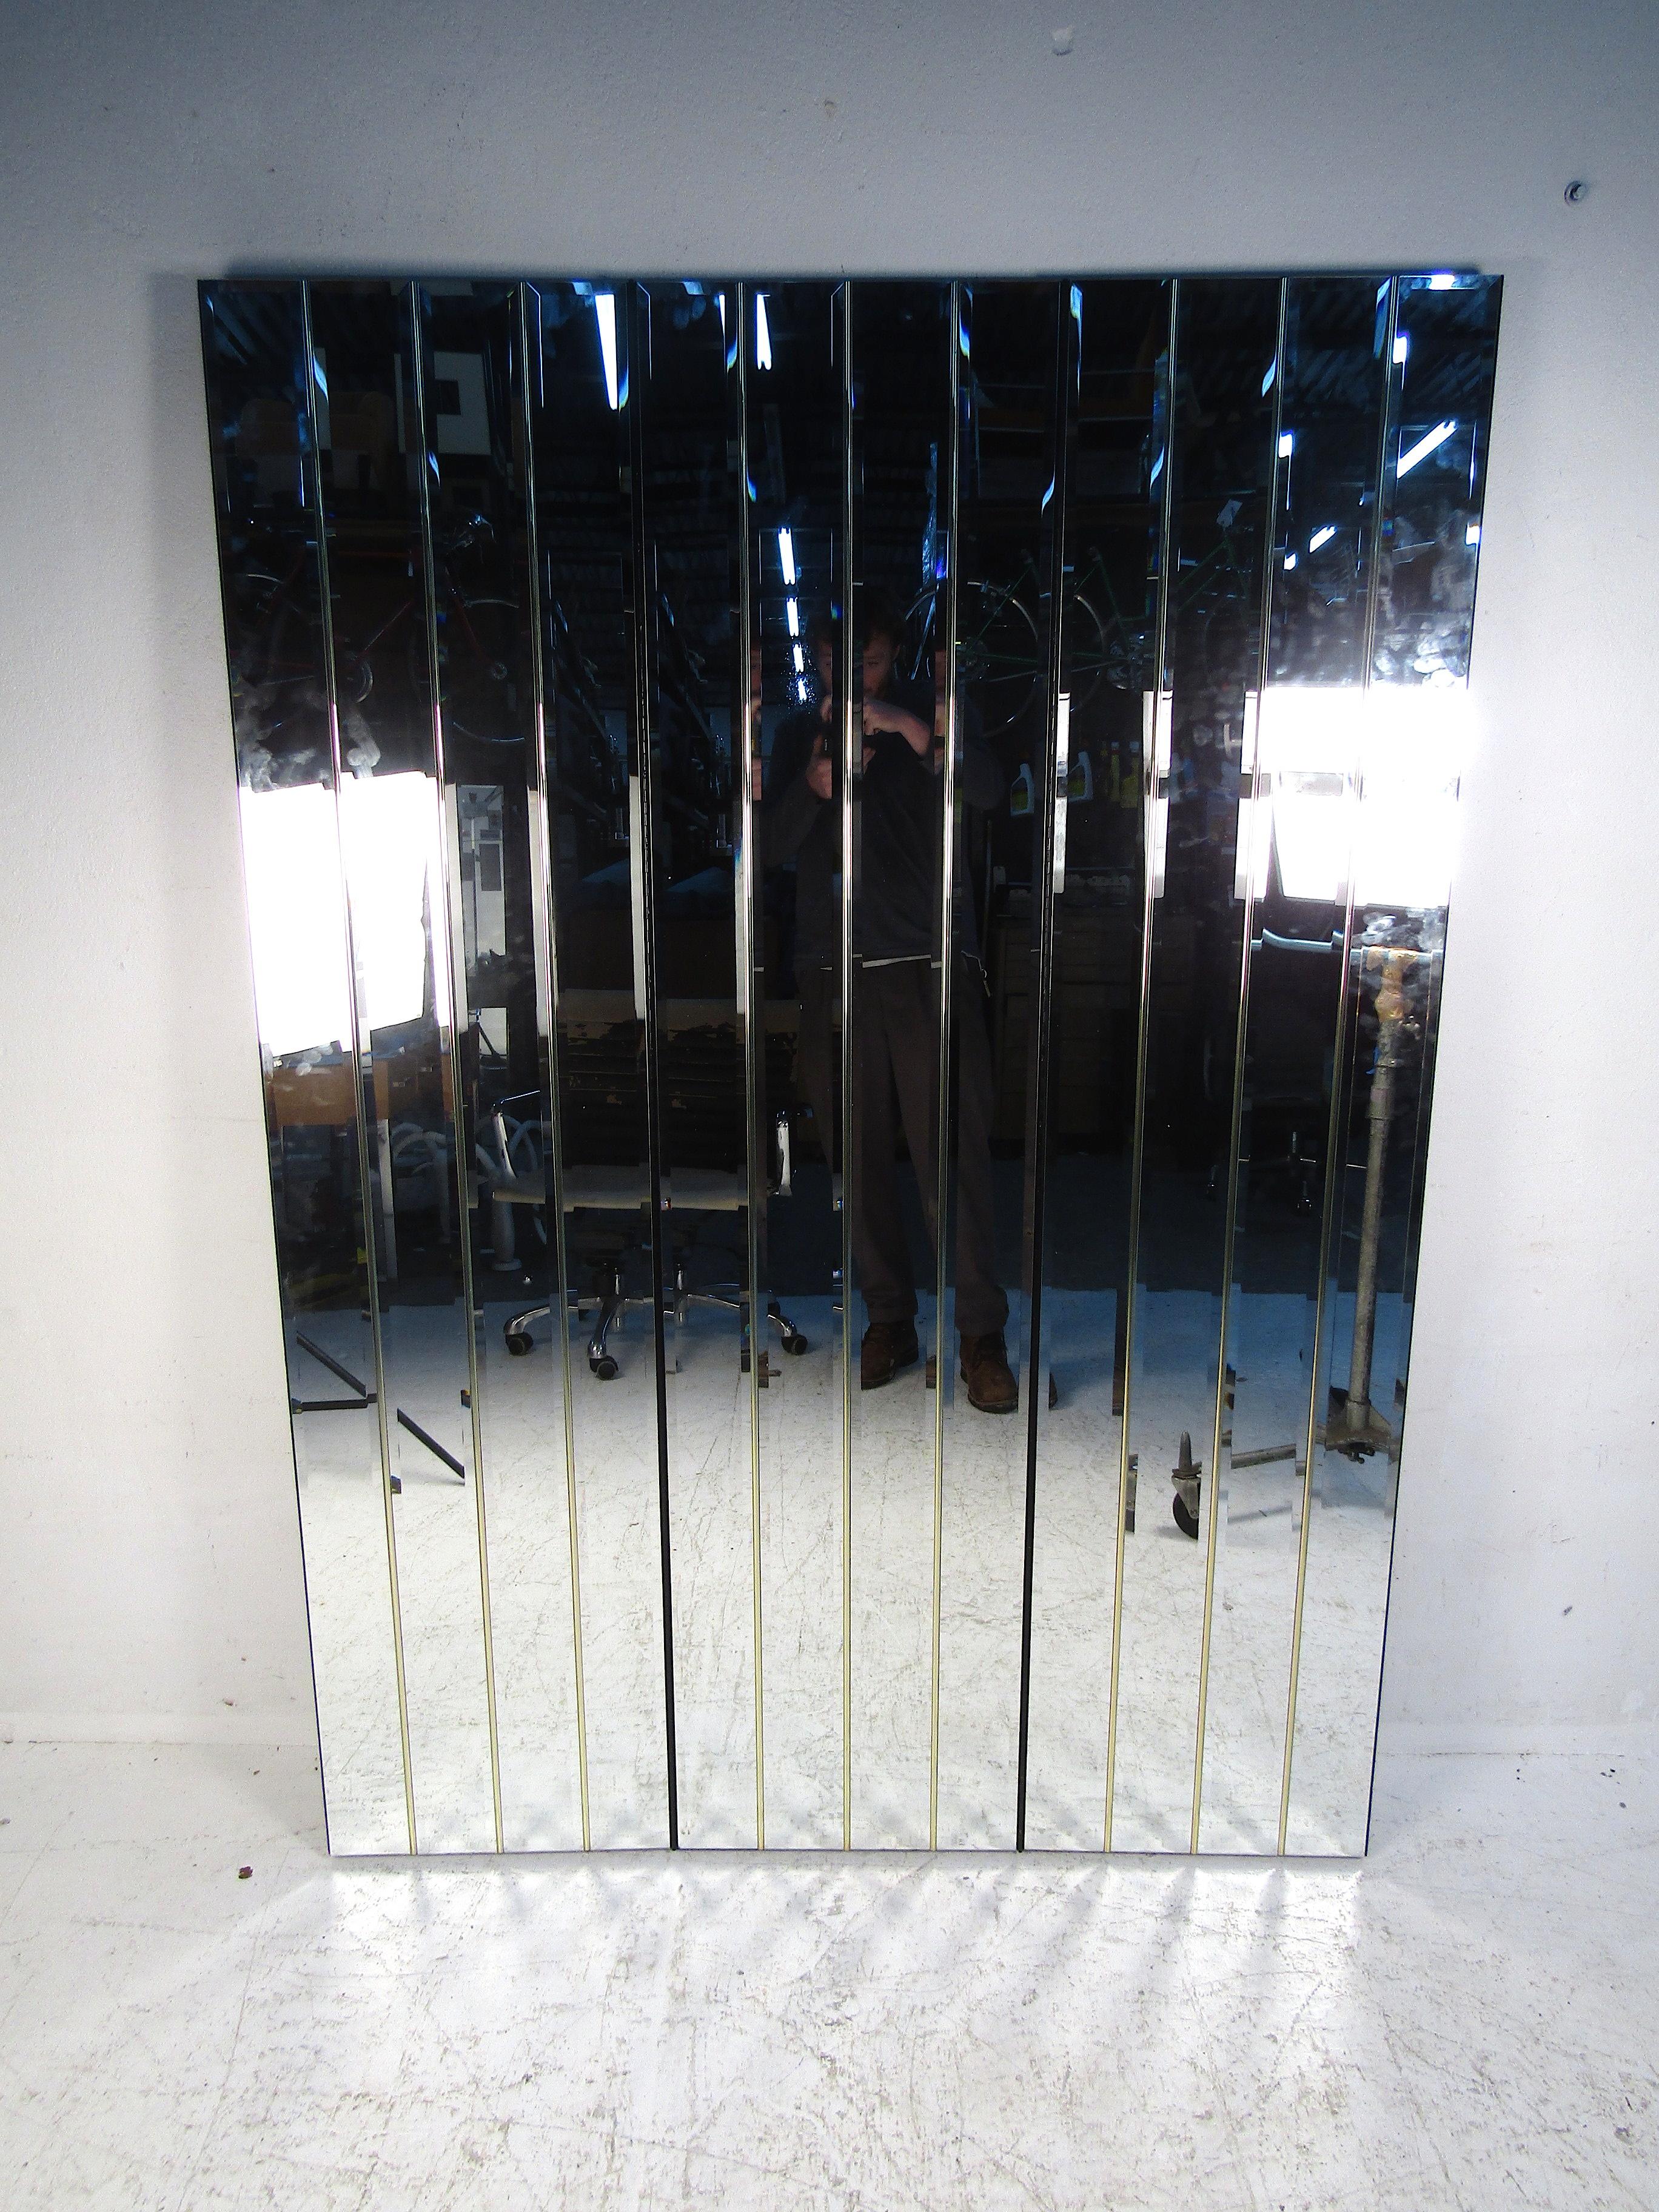 Impressive vintage three-paneled room divider. Each panel has a series of beveled mirrors on their face, with brass trim accents betwixt each mirror pane. Panels are connected with piano hinges. Unusual design, sure to be a great addition to any